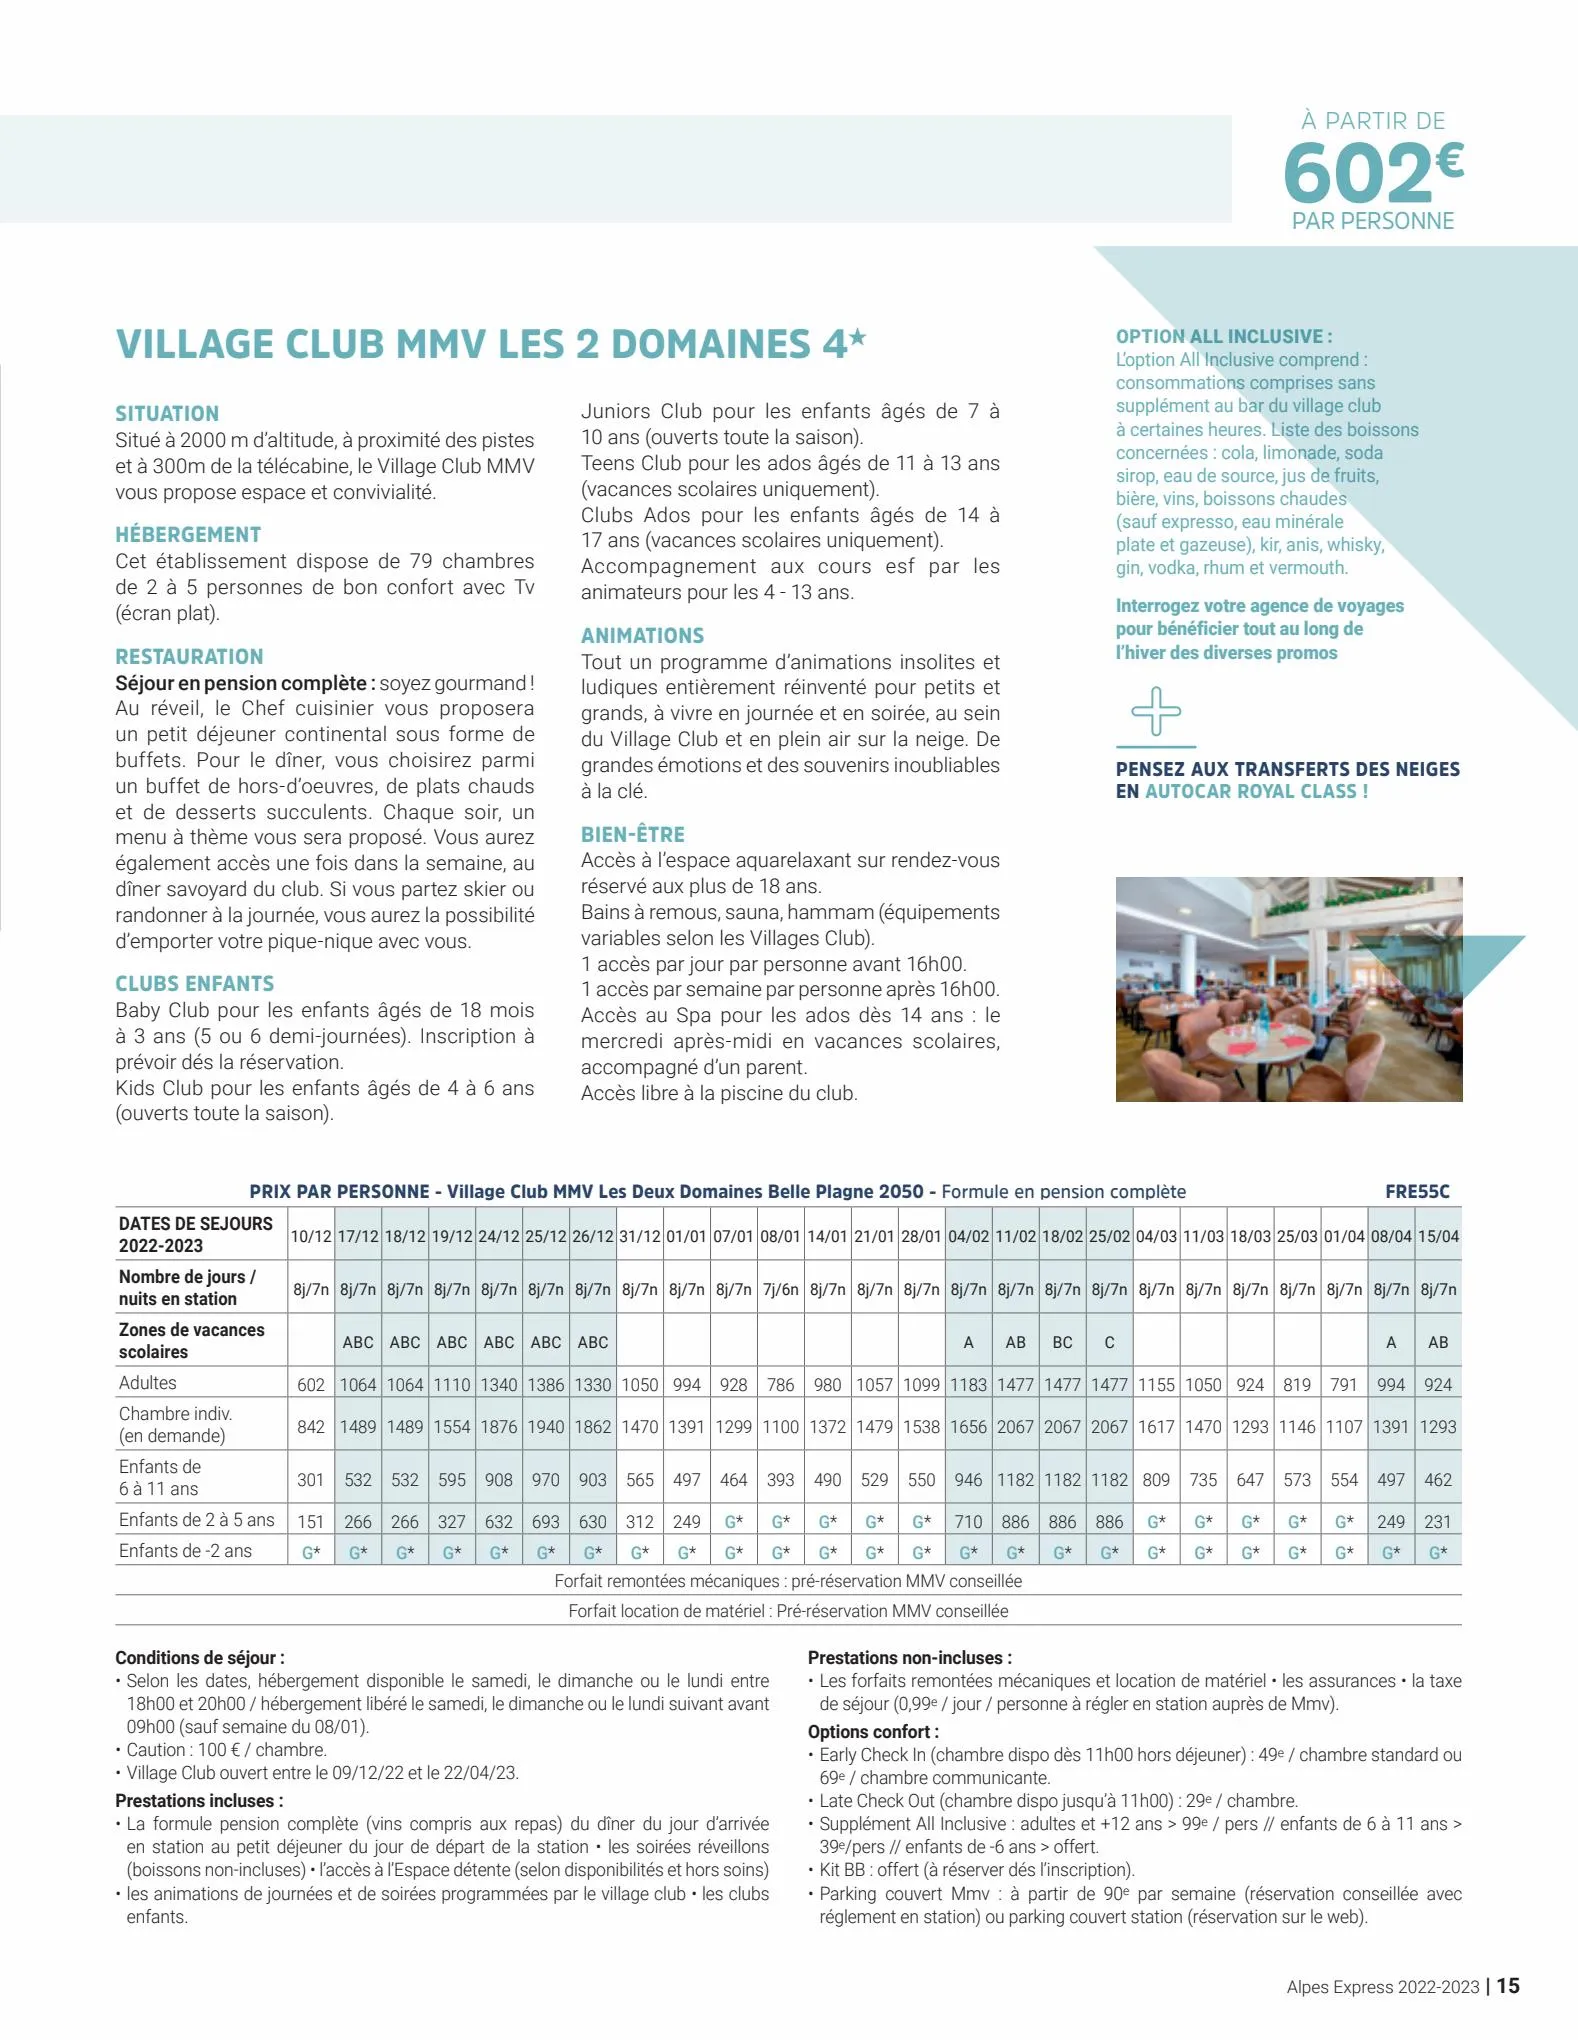 Catalogue Alpes Express - Hiver 2022-2023, page 00015